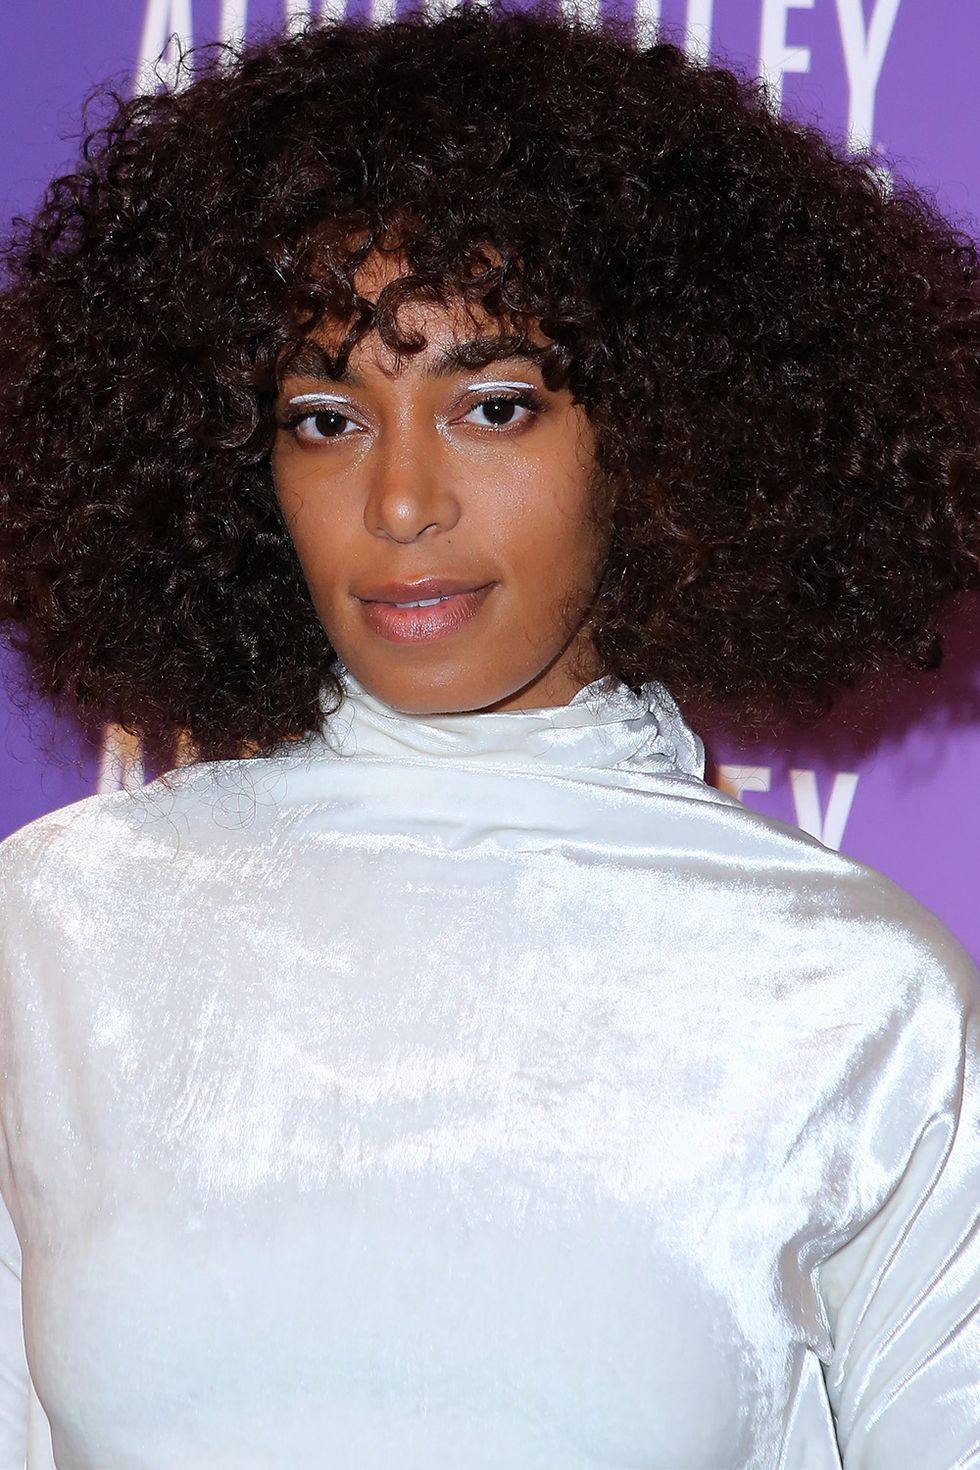 <p><strong data-redactor-tag="strong" data-verified="redactor">Solange Knowles</strong> mostra una frangia&nbsp;audace riccia.</p><p><span class="redactor-invisible-space" data-verified="redactor" data-redactor-tag="span" data-redactor-class="redactor-invisible-space"></span></p>